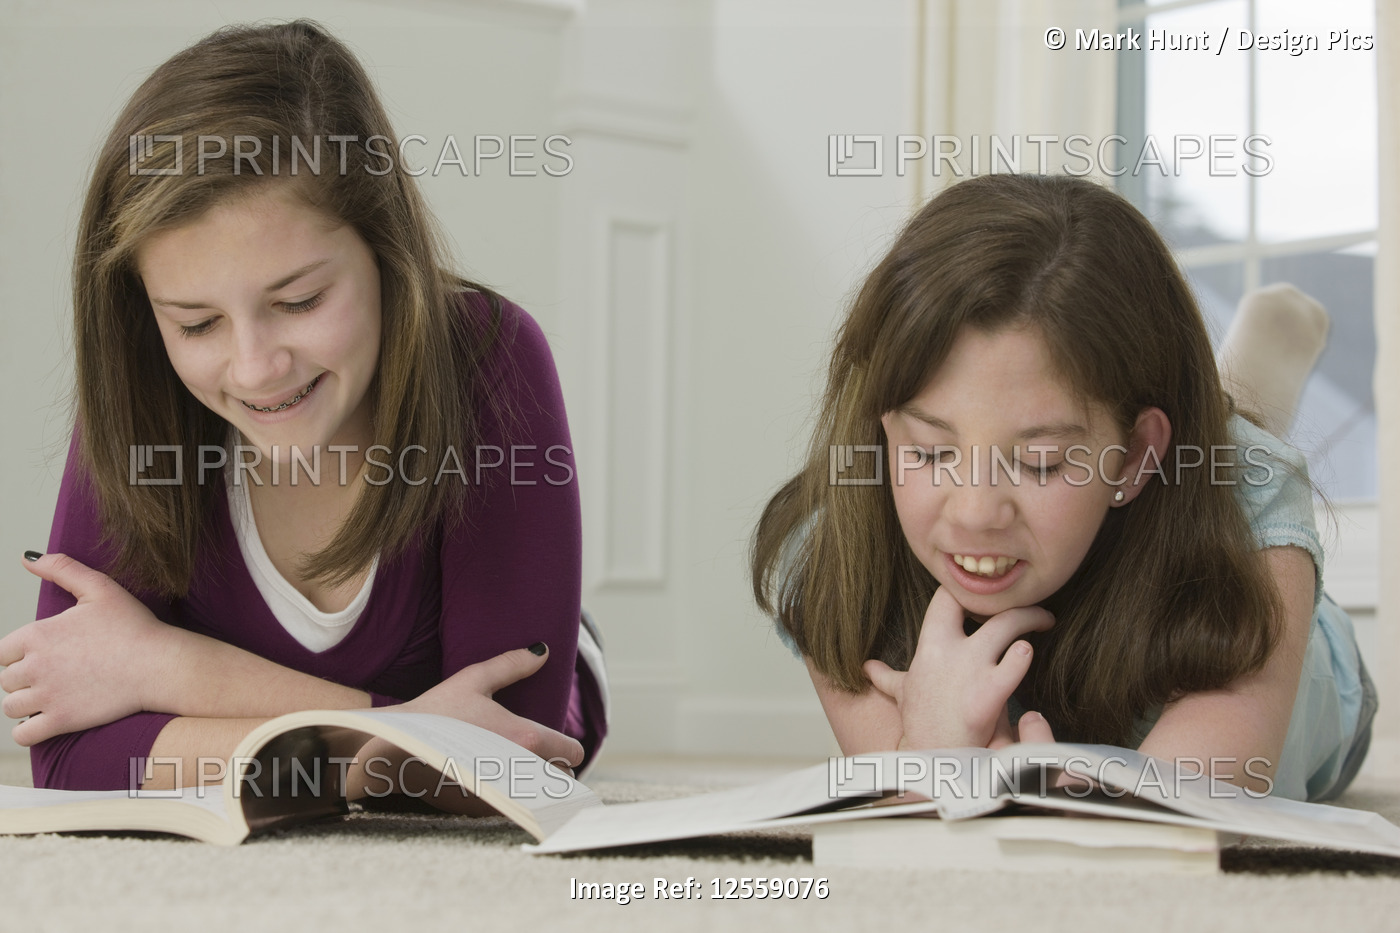 Two teenage girls studying together, one with birth defect